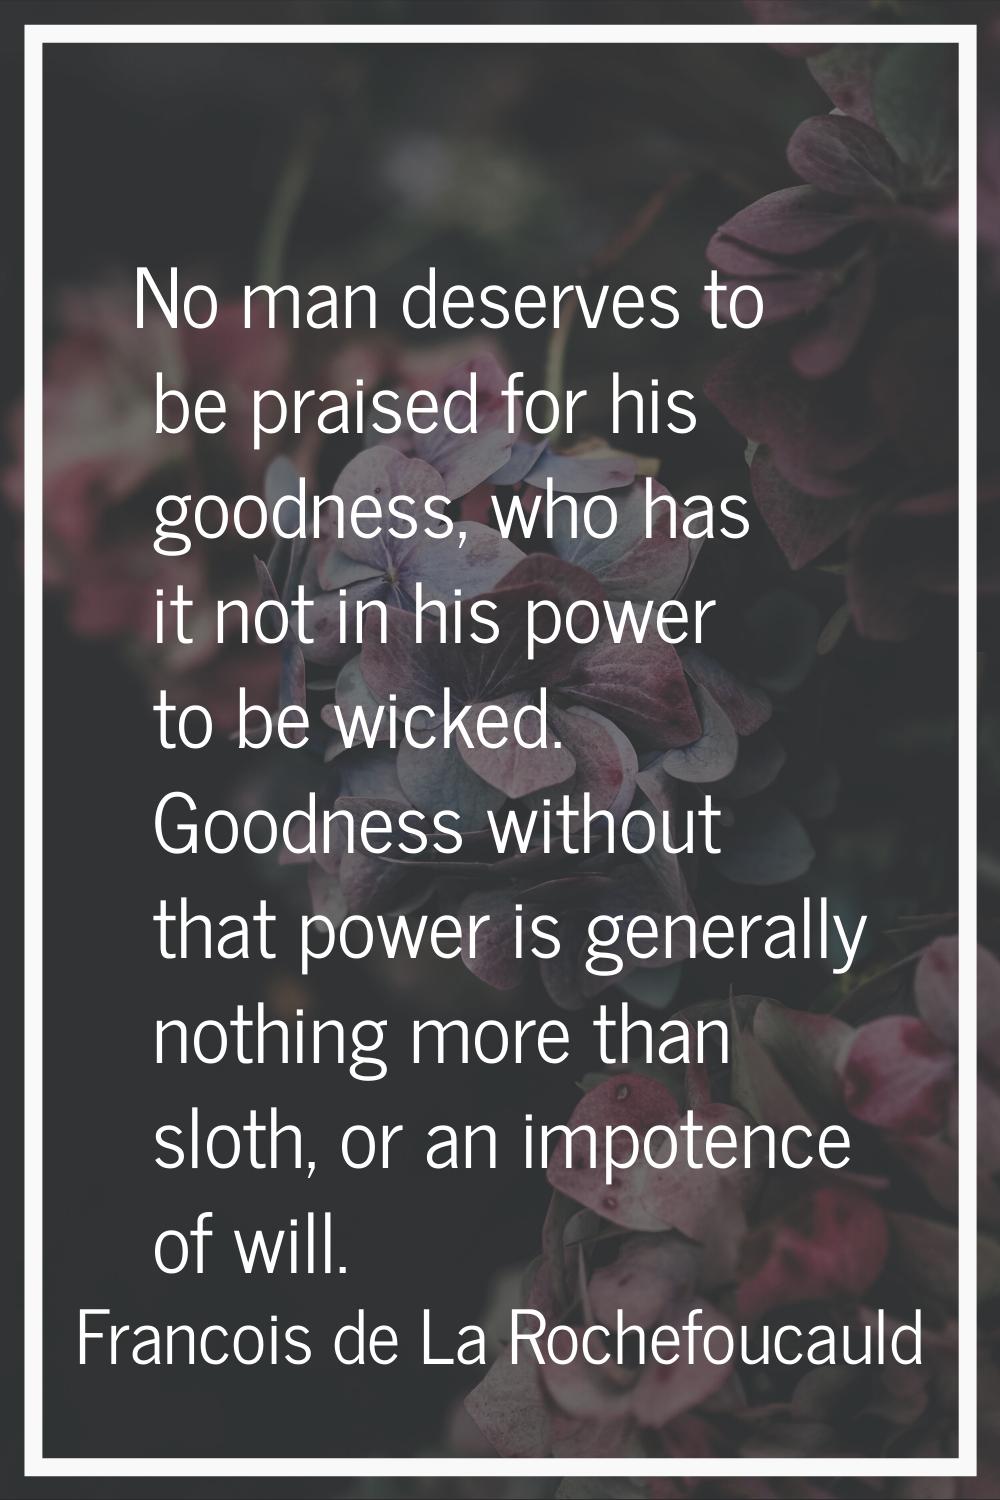 No man deserves to be praised for his goodness, who has it not in his power to be wicked. Goodness 